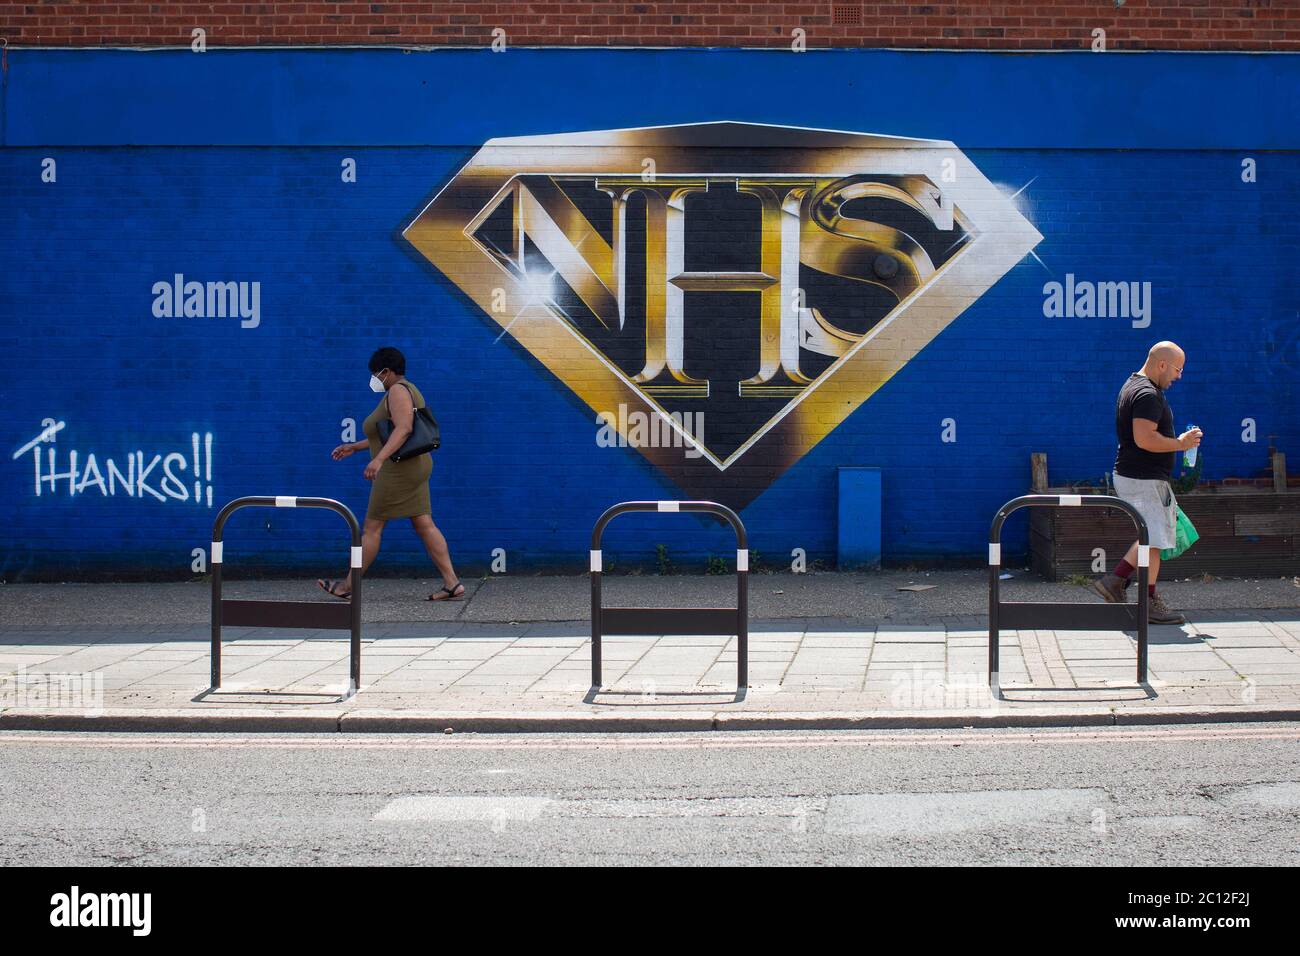 Tulse Hill, London, England. 13th June 2020. A large NHS wall mural in the form of the Superman logo painted on a blue wall in Tulse Hill in South London. (photo by Sam Mellish / Alamy Live News) Stock Photo